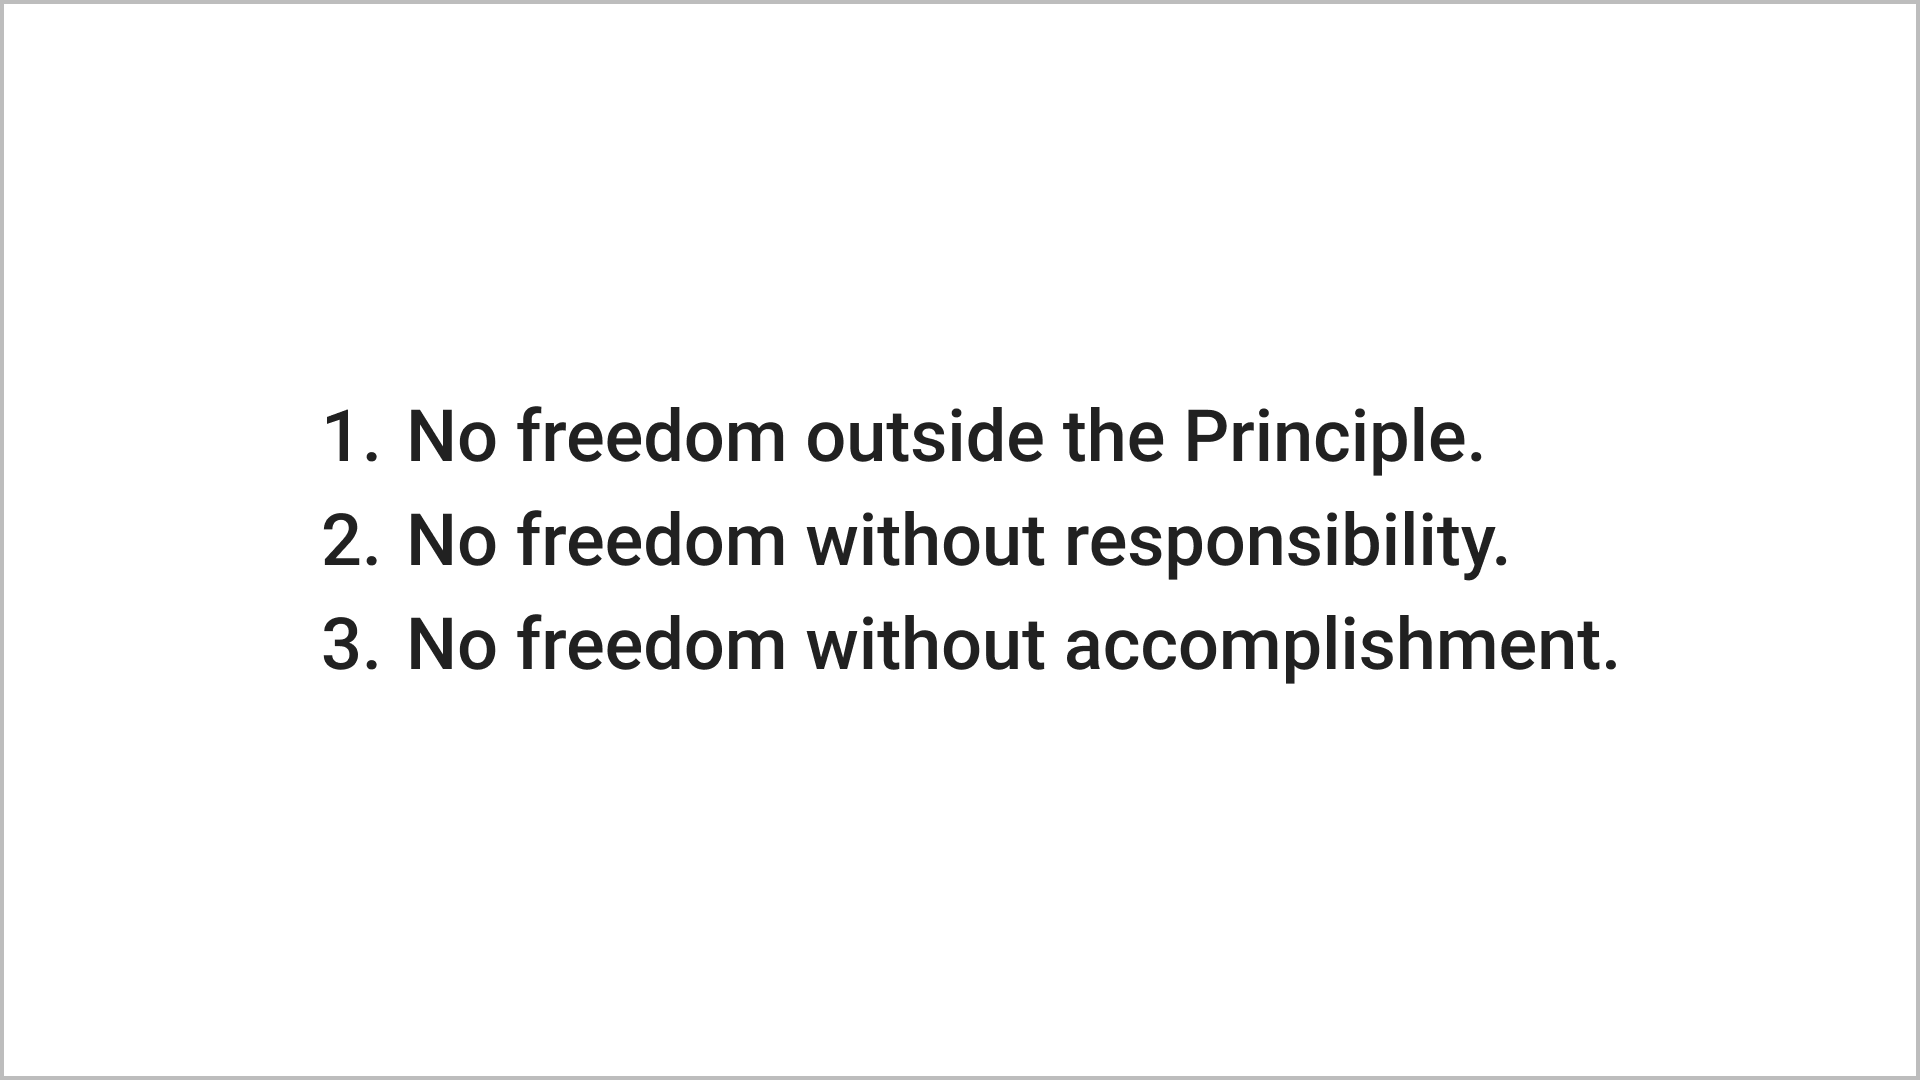 The Meaning of Freedom from the Viewpoint of the Principle